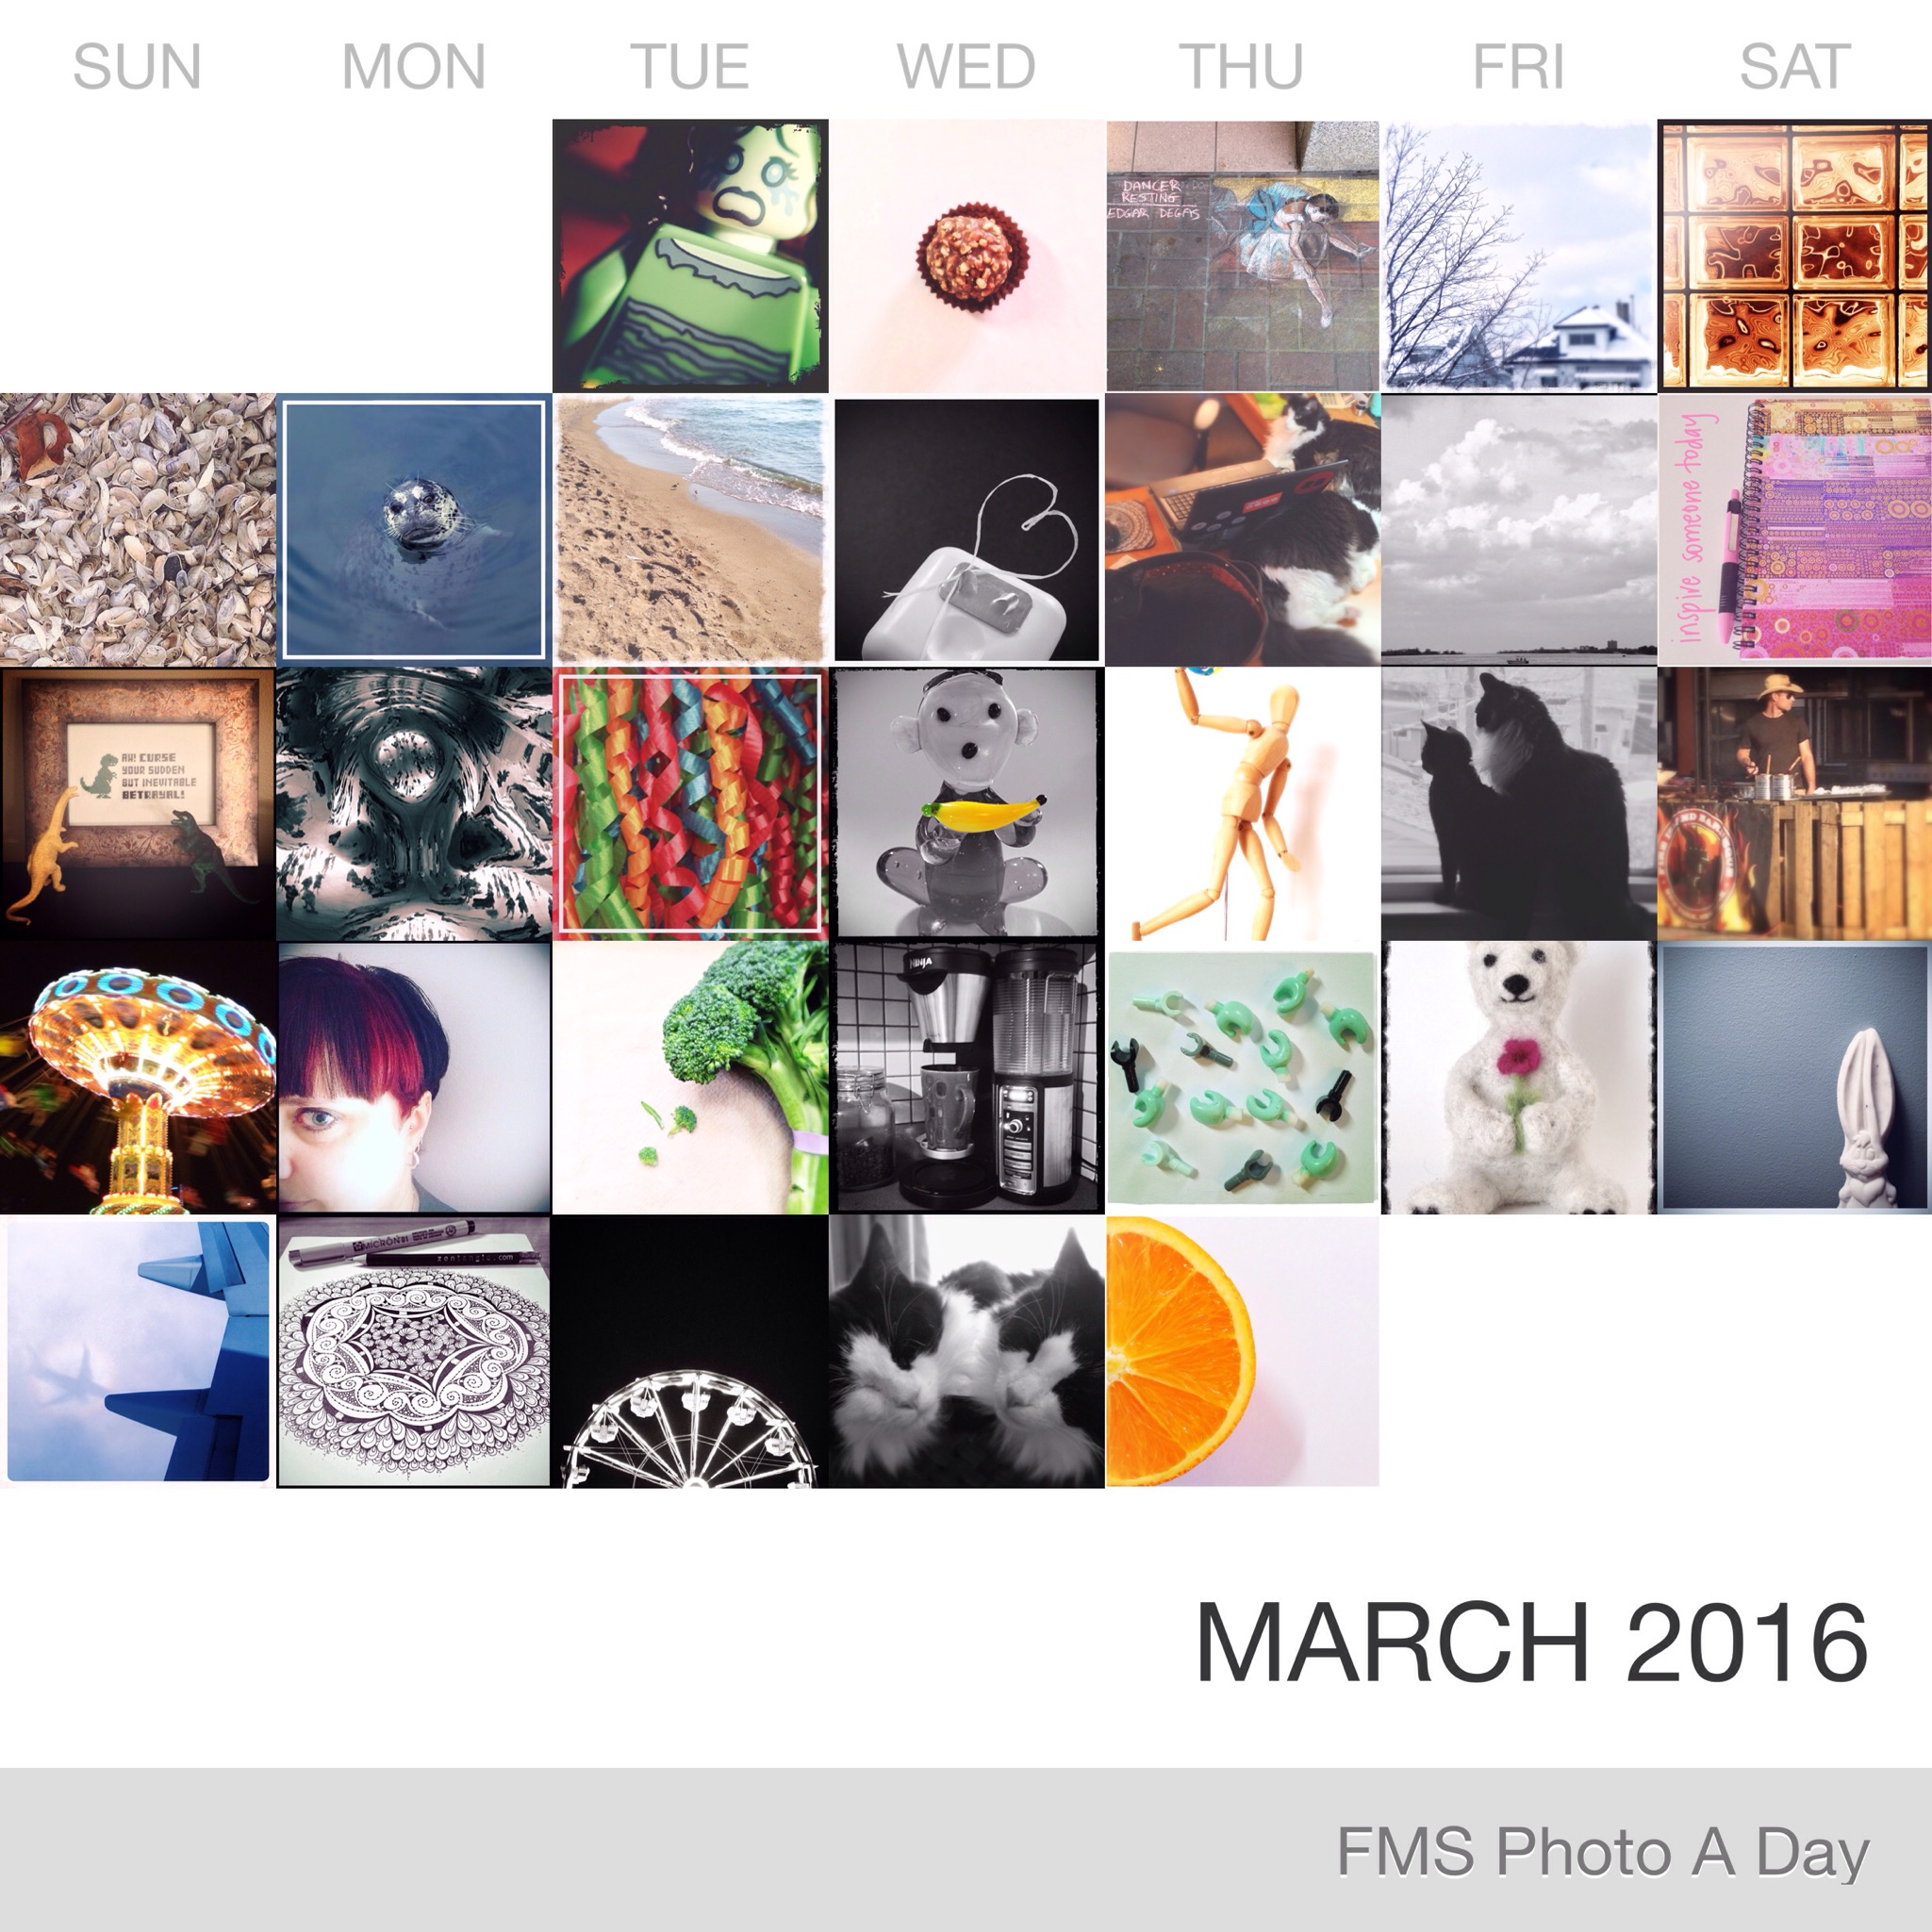 FMS Photo A Day March 2016